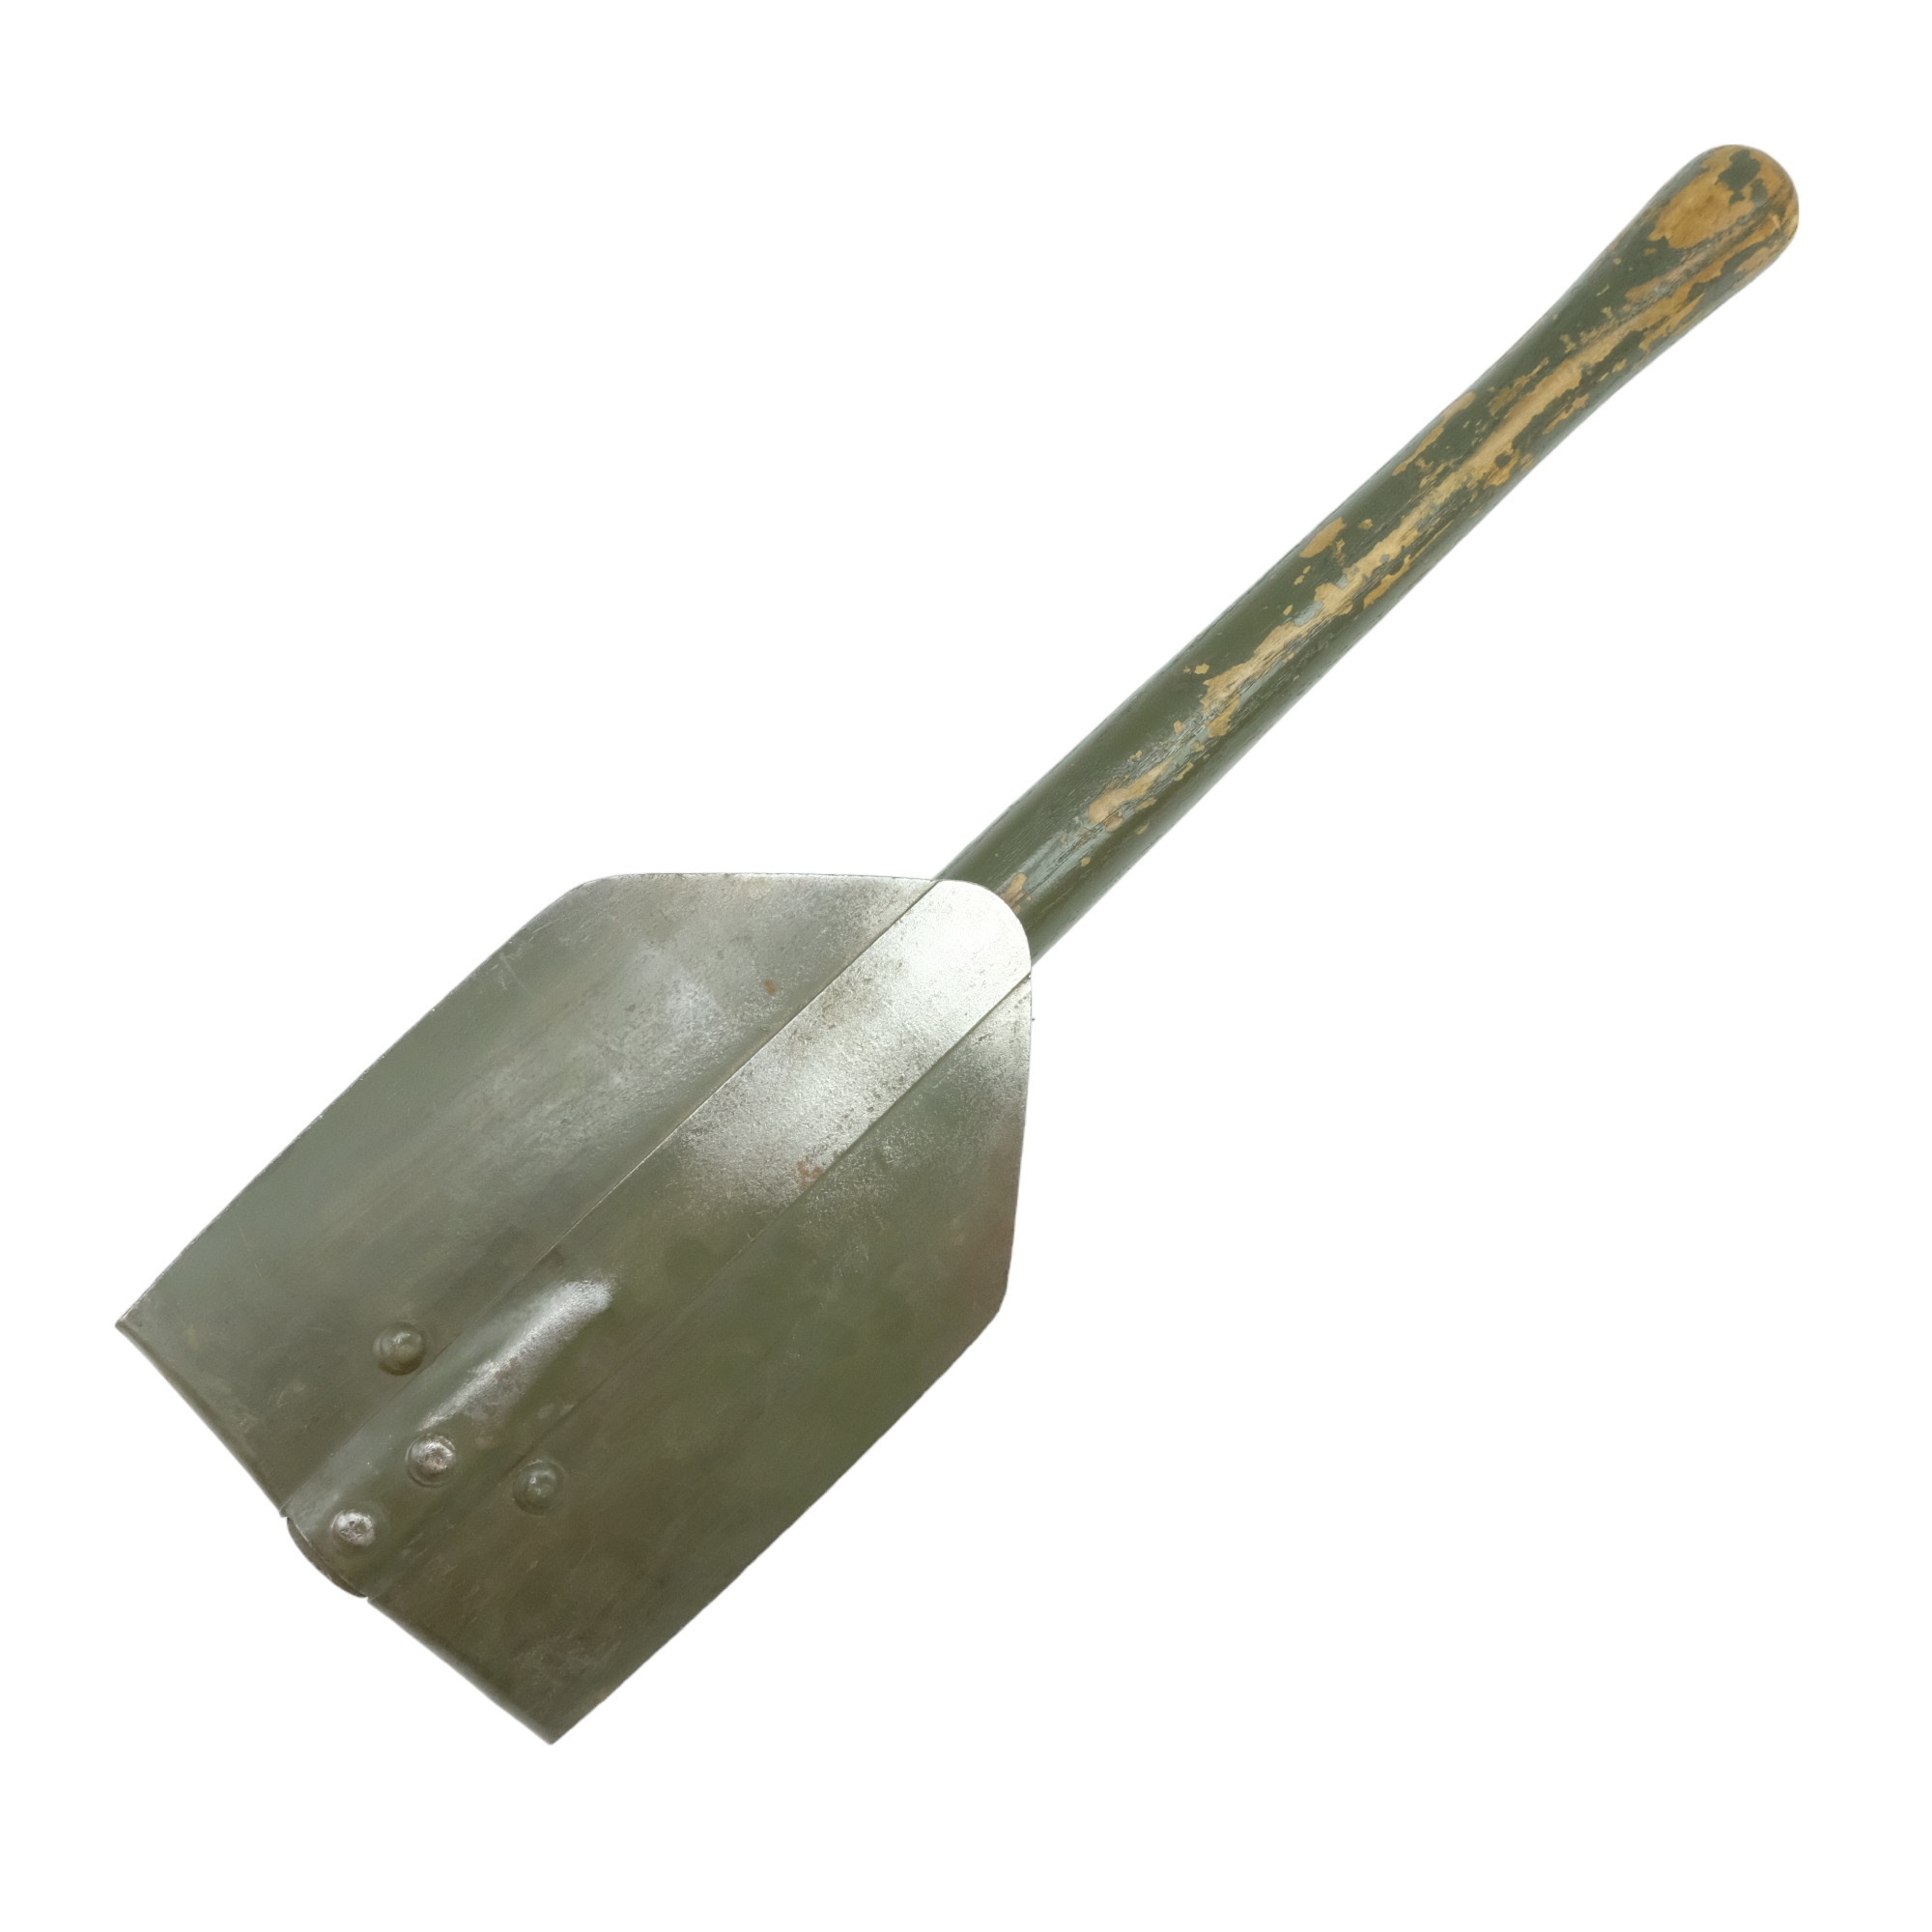 A Second World War US Army M 1943 Entrench Tool and carrier - Image 3 of 3